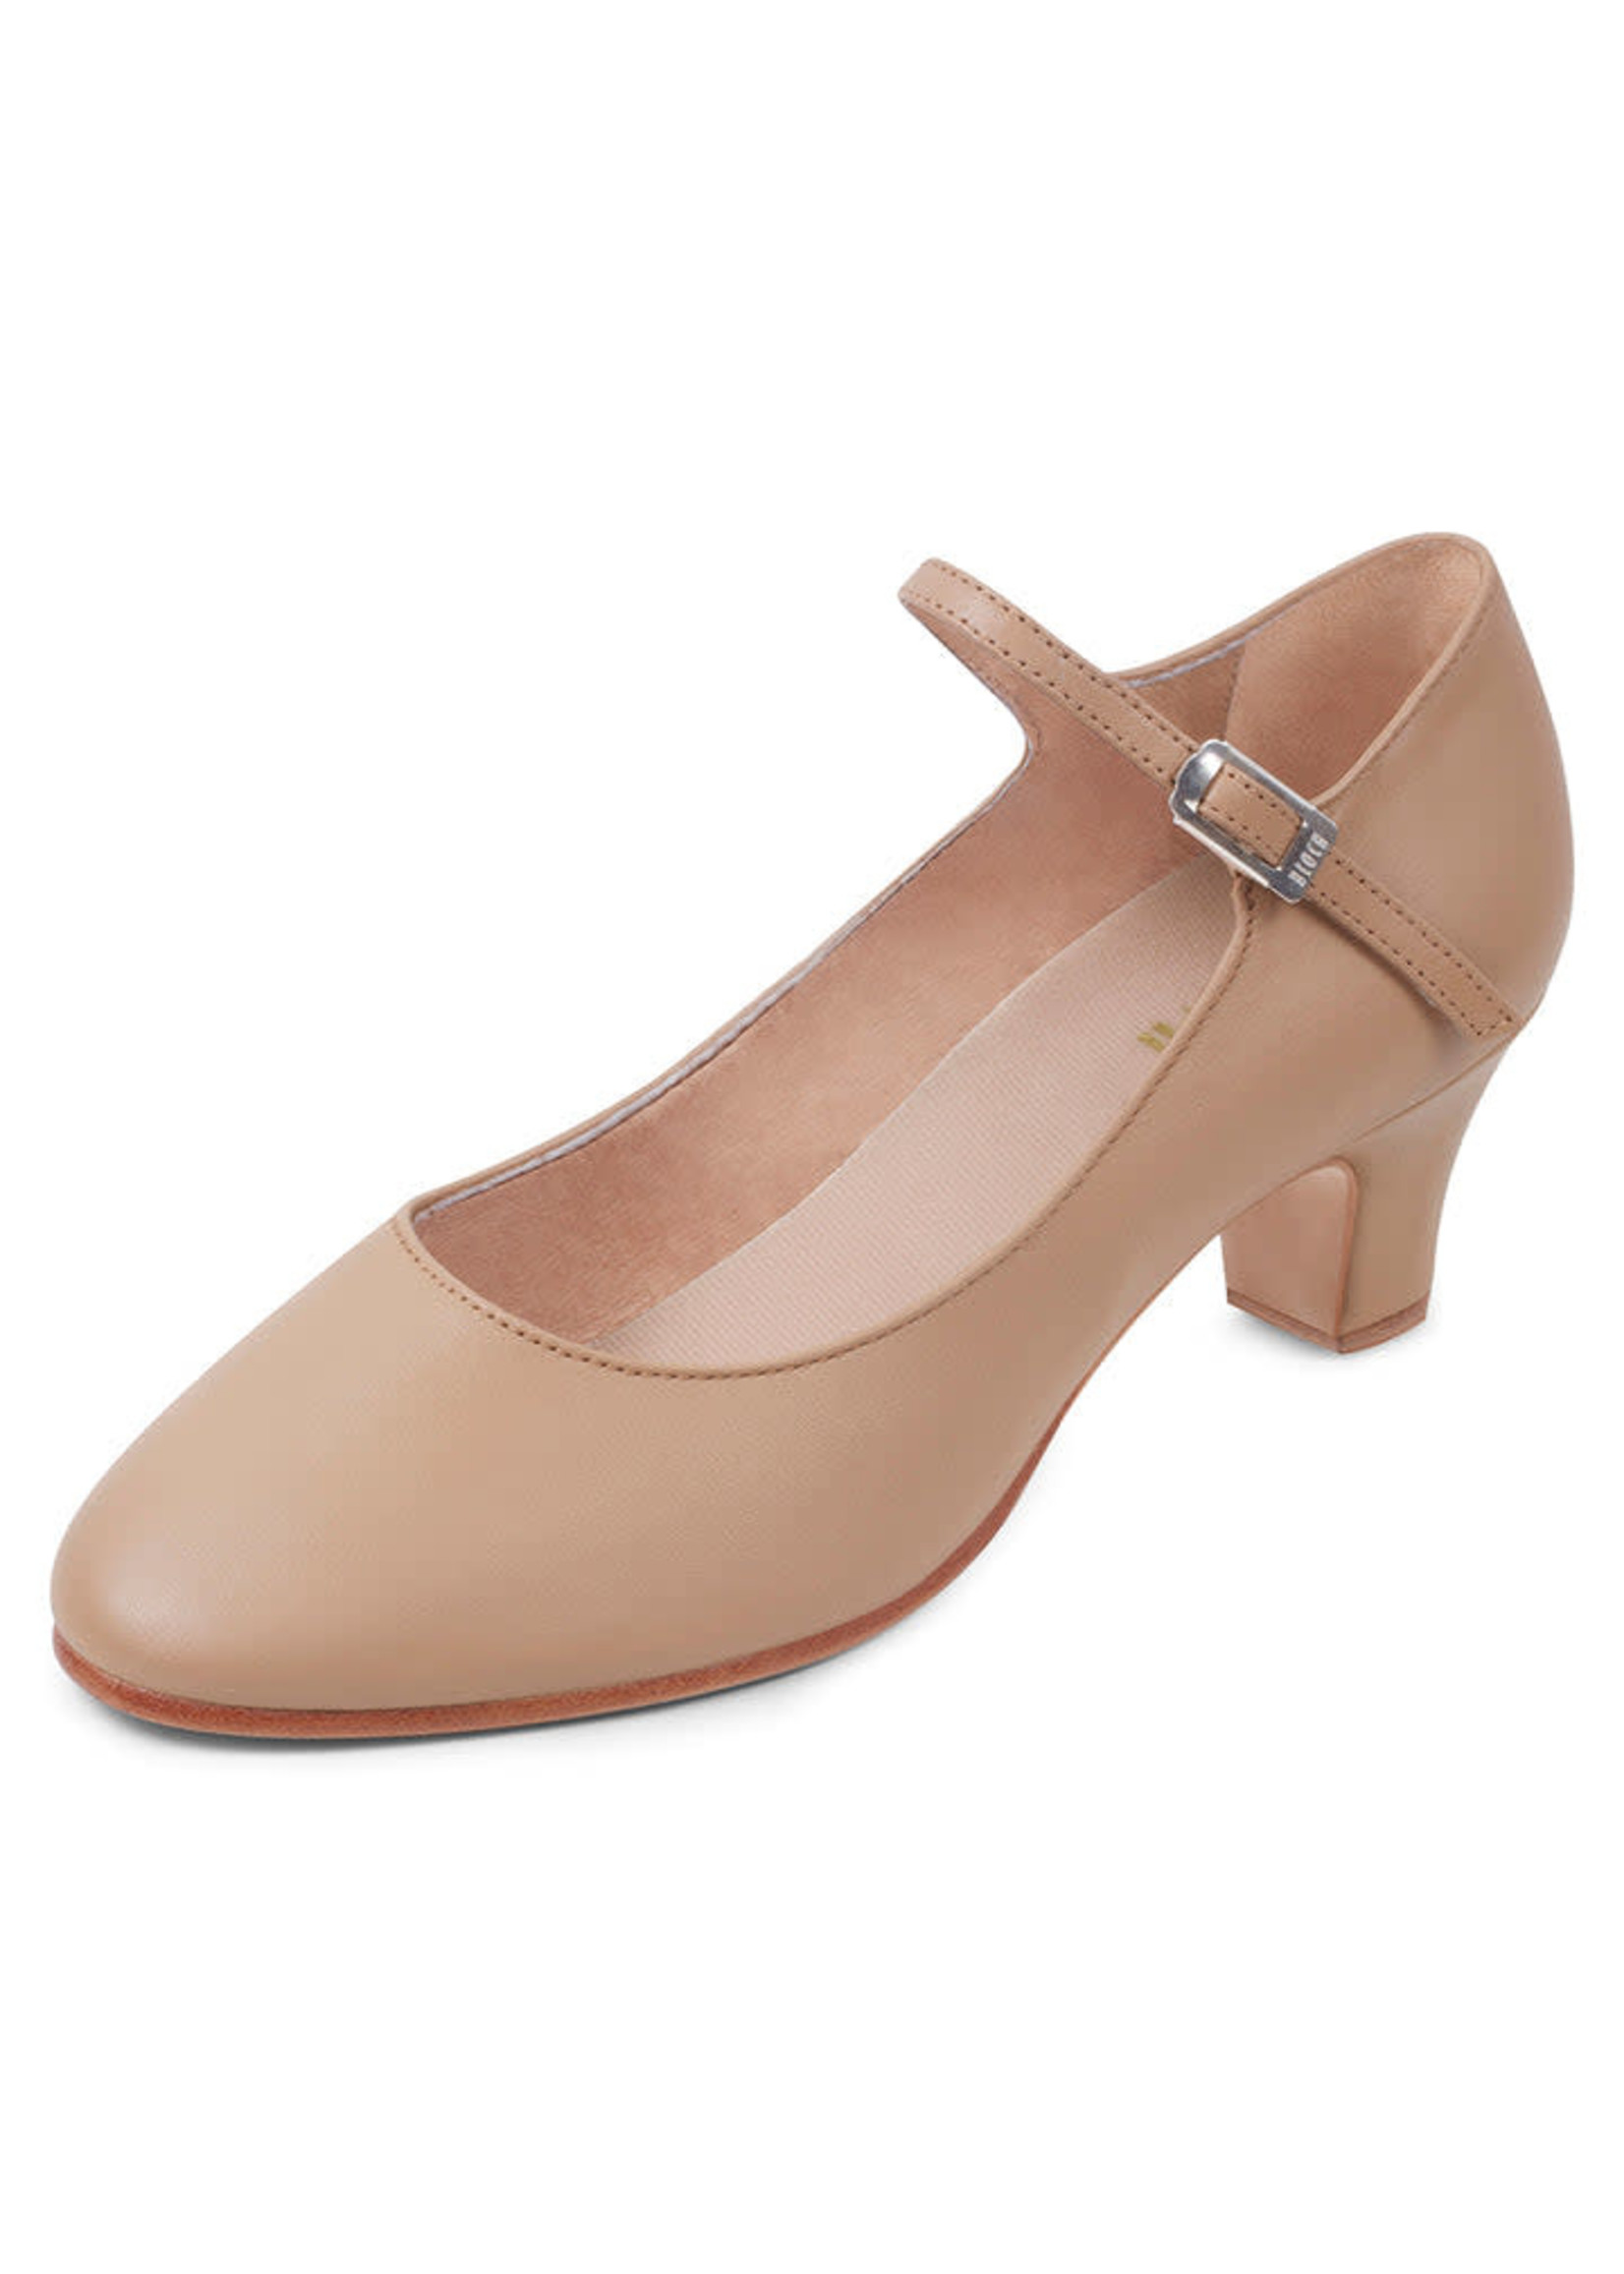 Bloch Bloch Chord Ankle Strap 2" Character Shoe